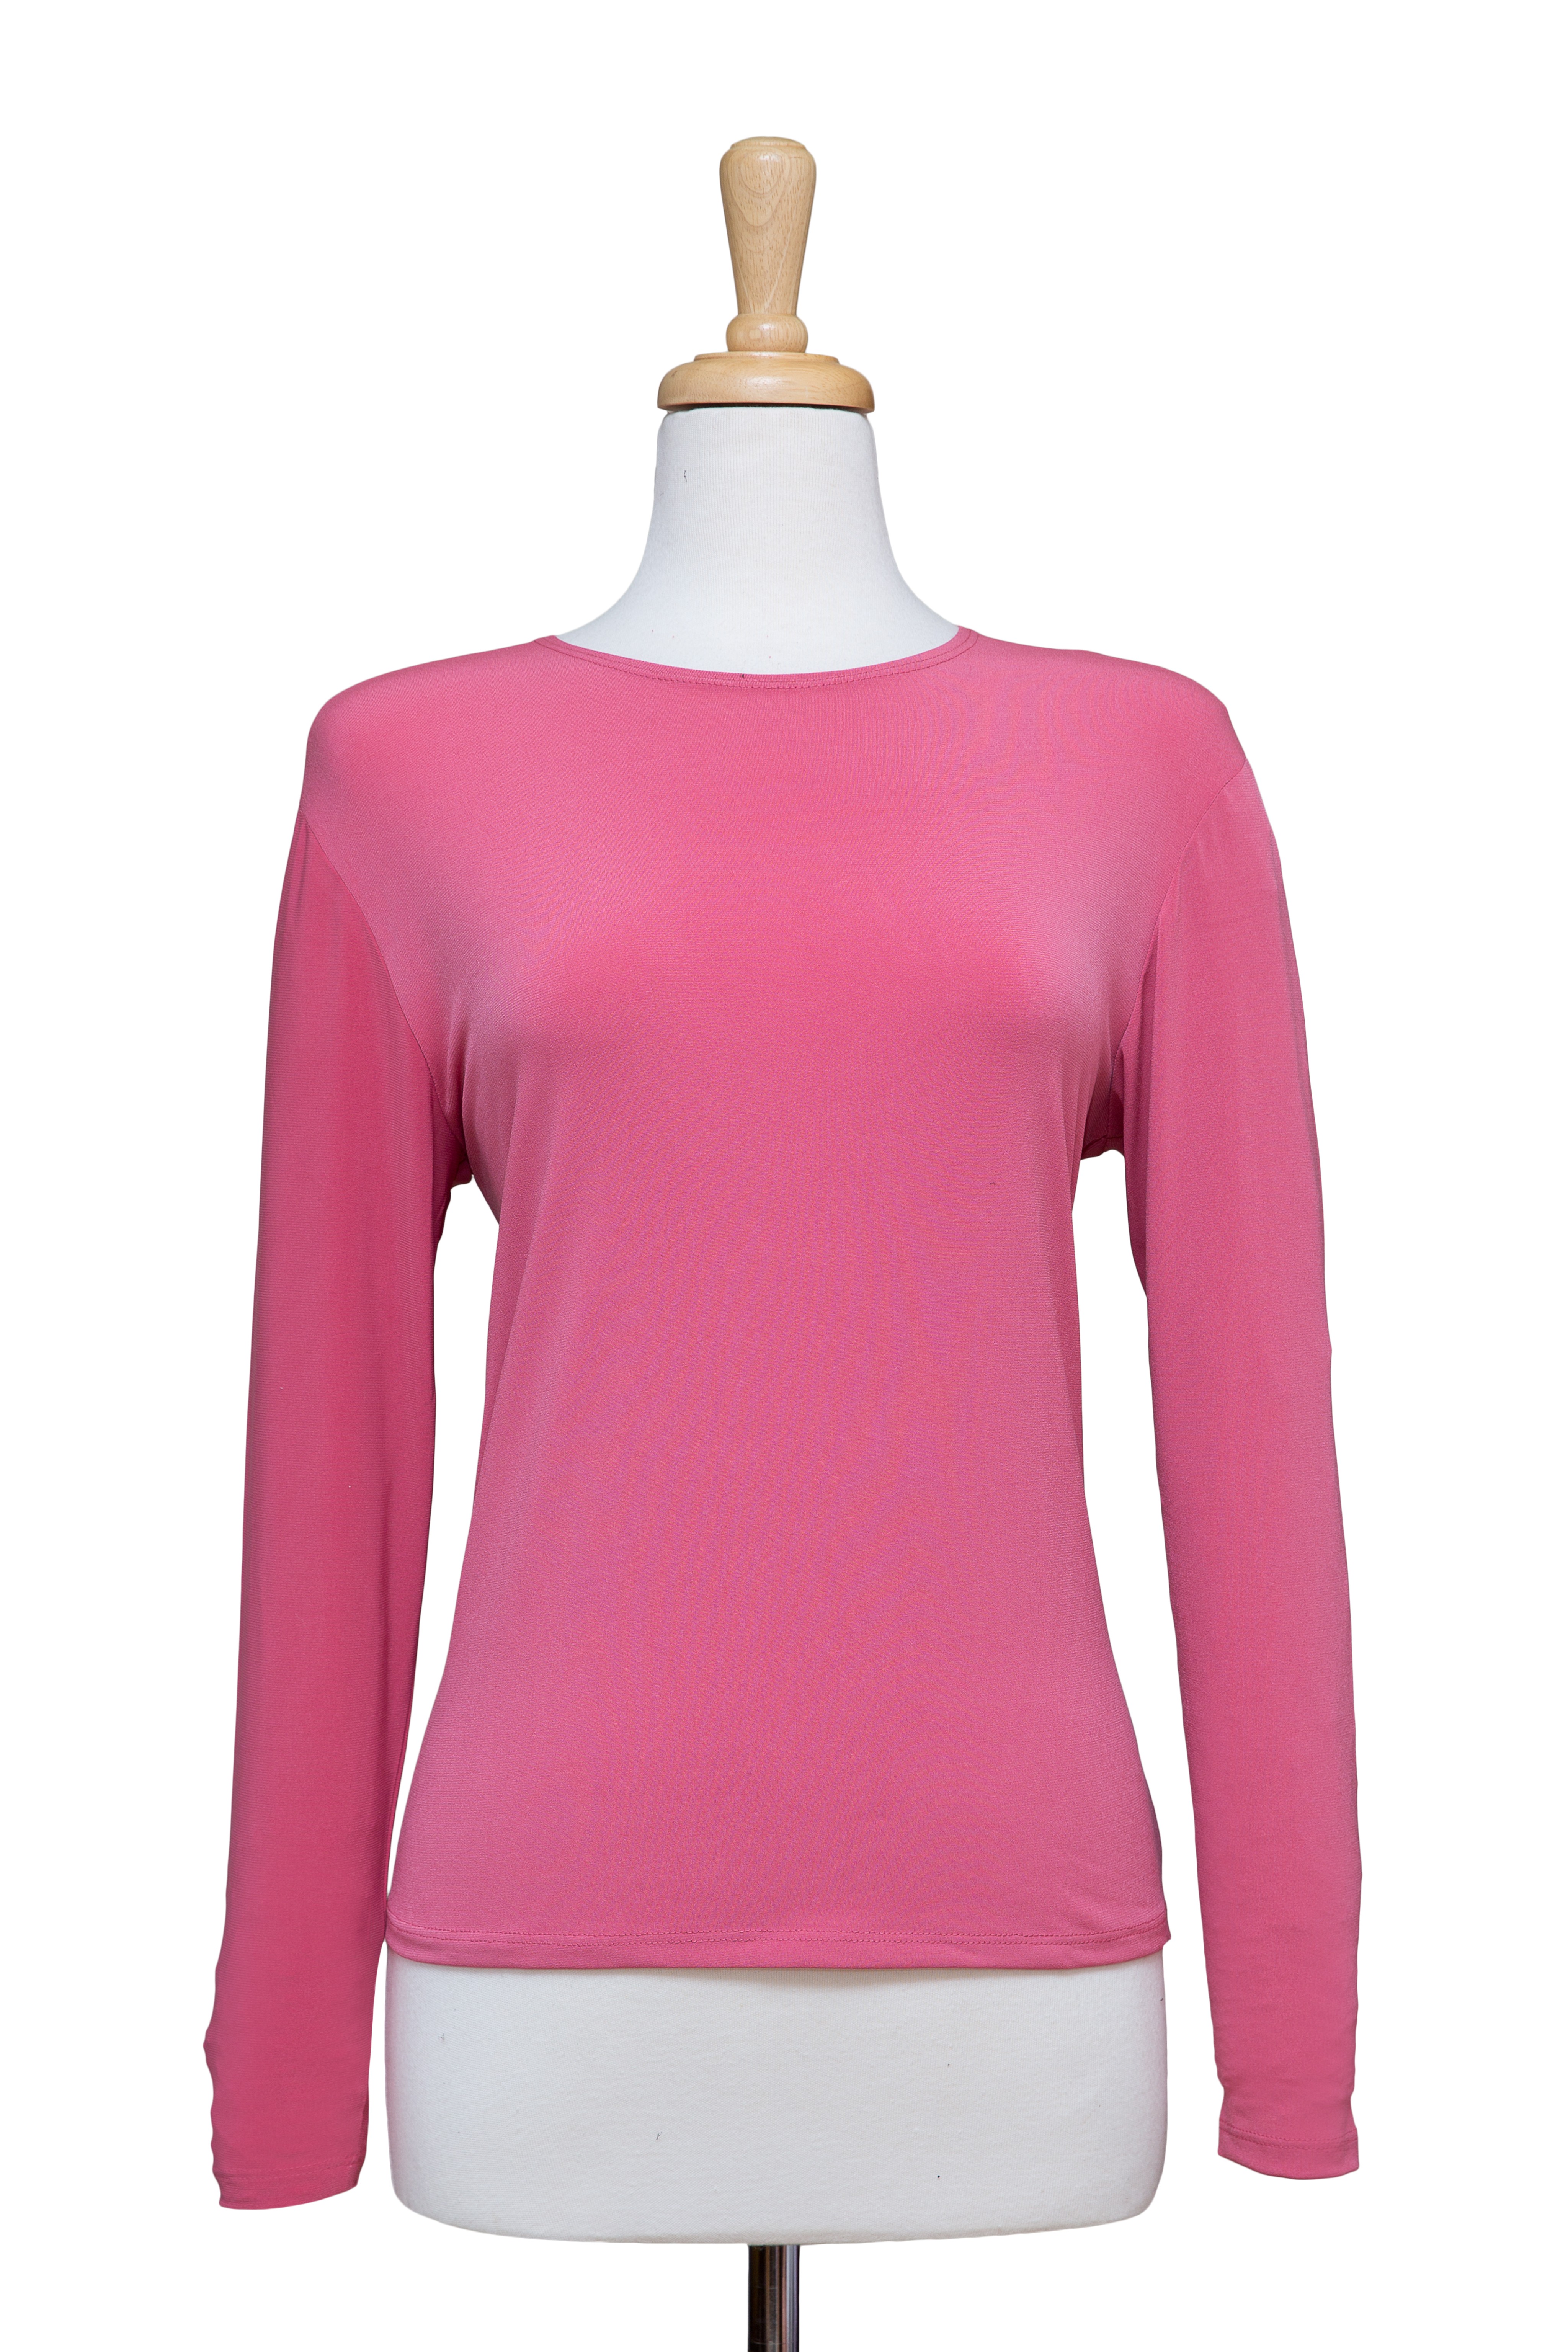 Plus Size Coral Long Sleeve Microfiber Top